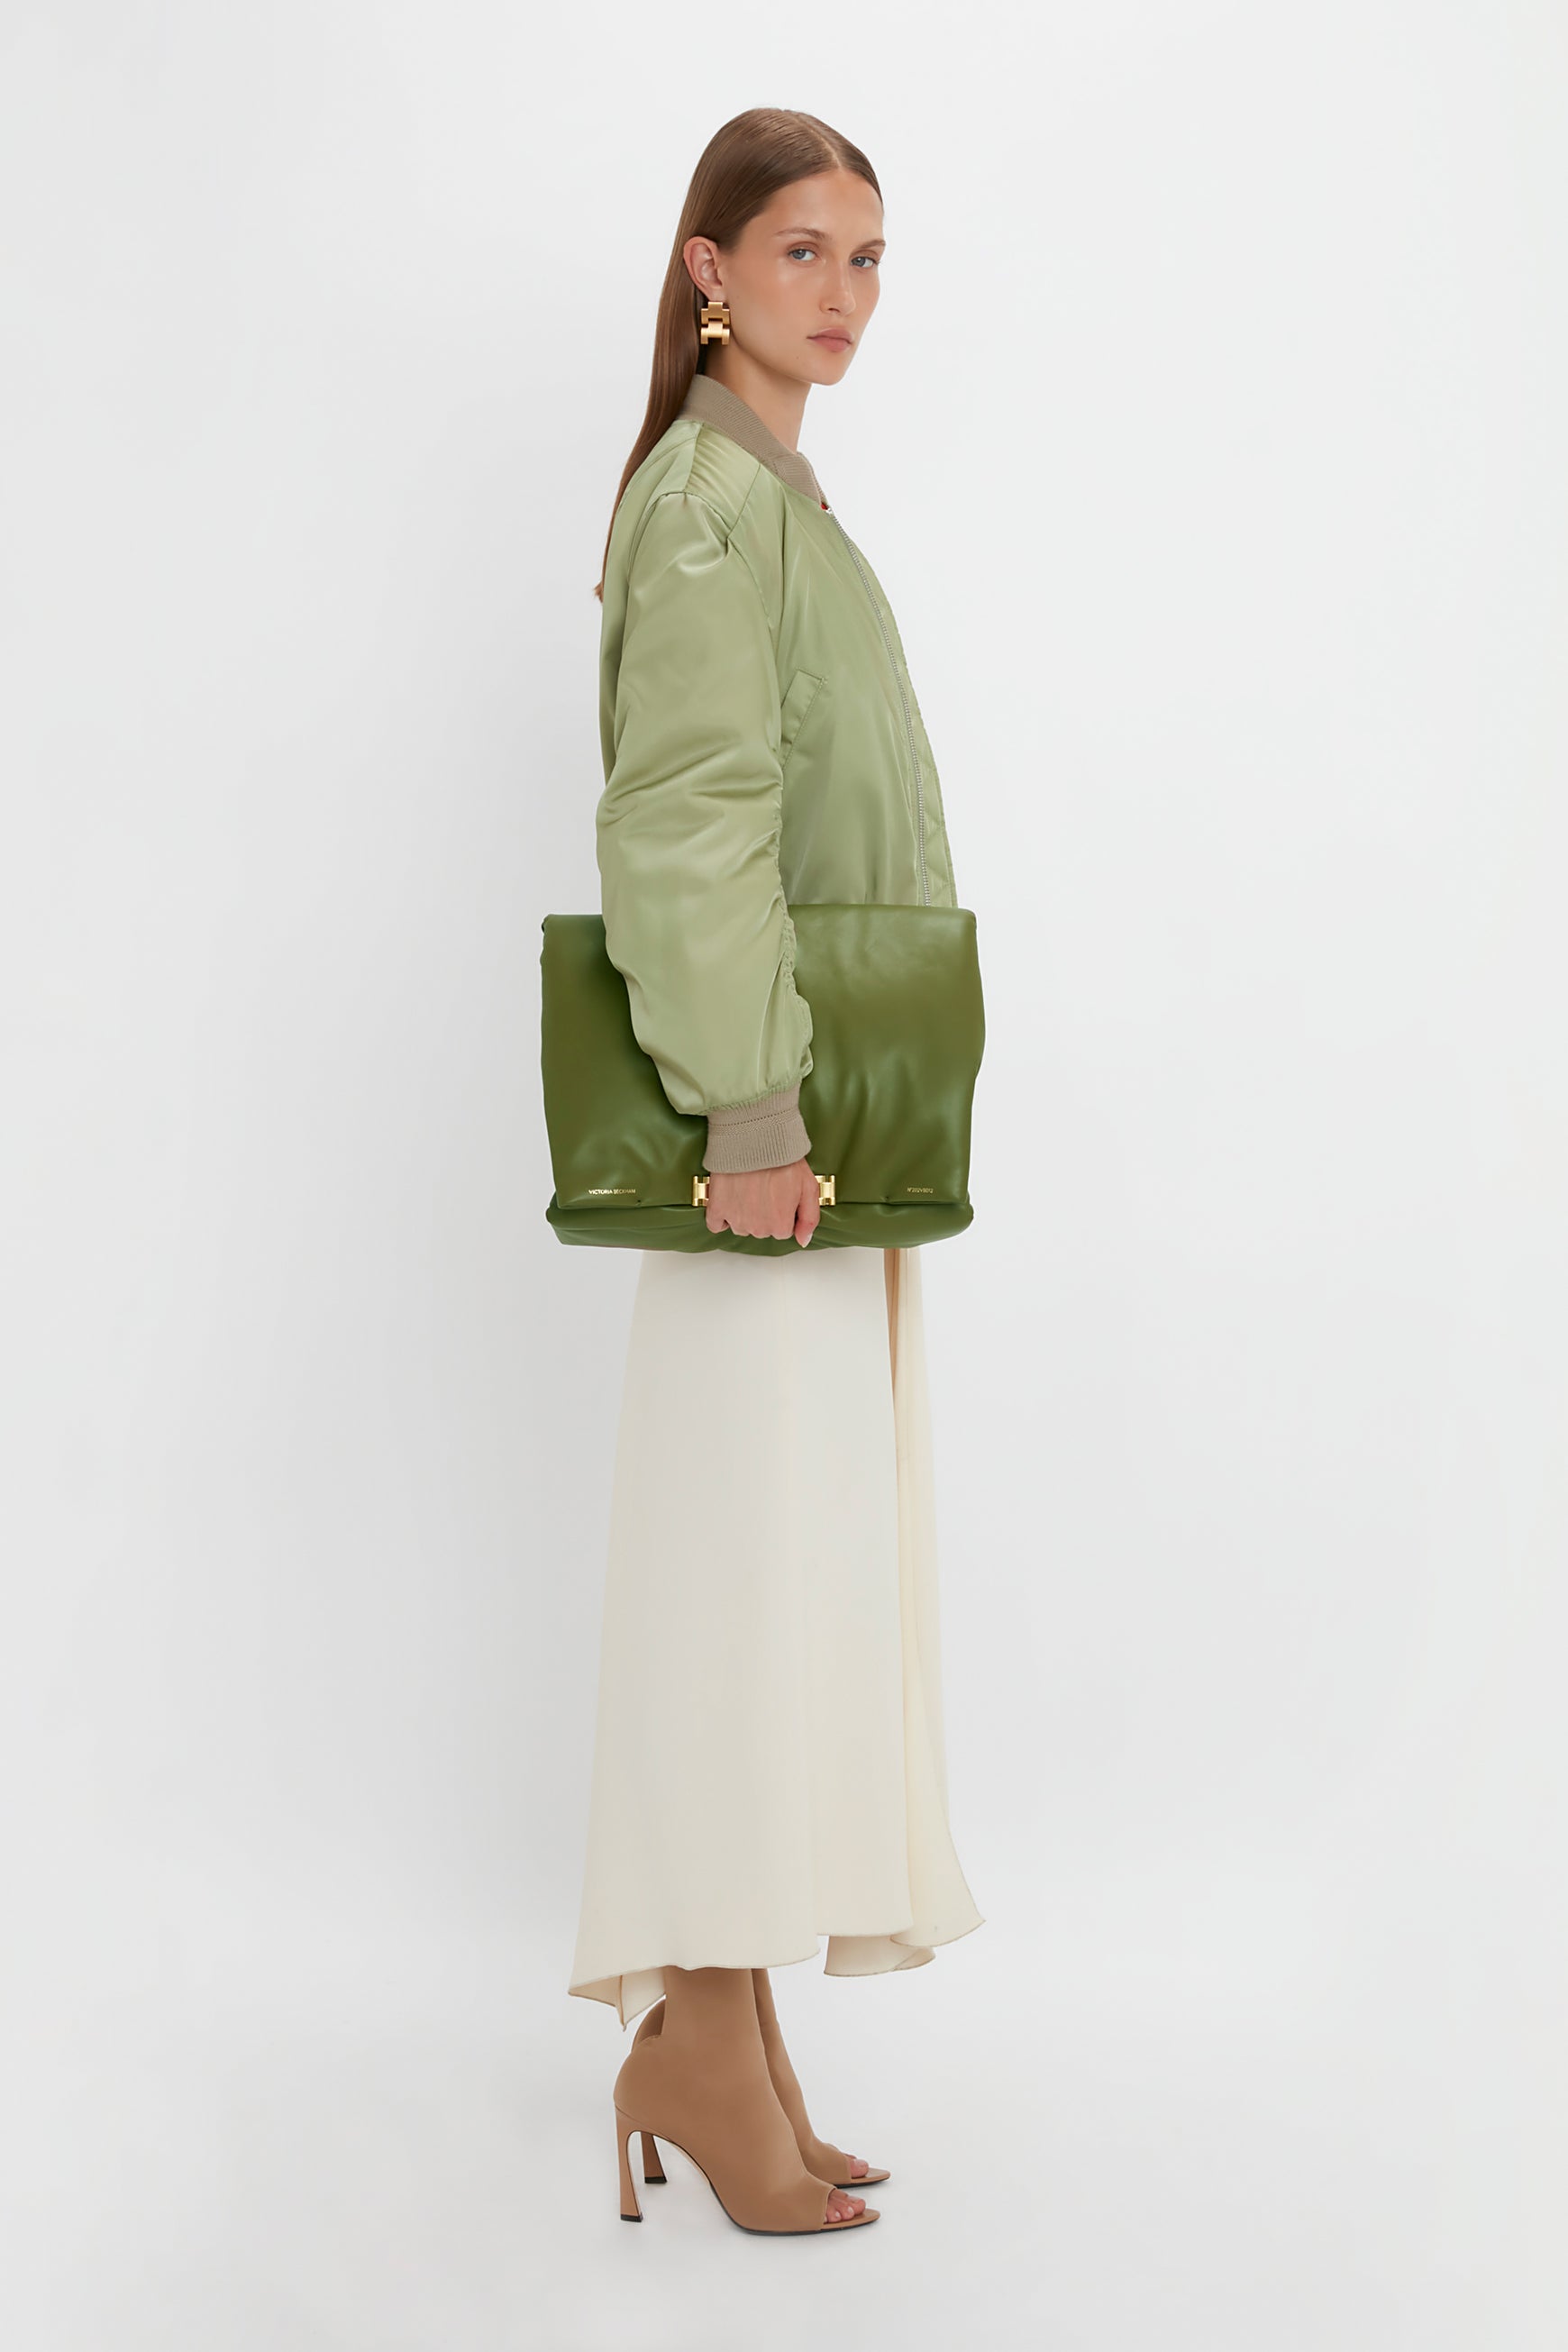 Woman in a green bomber jacket and long white skirt, holding a Victoria Beckham Puffy Jumbo Chain Pouch In Khaki Leather with an adjustable shoulder strap. She is wearing tan open-toe heels and gold earrings, standing against a plain white background.